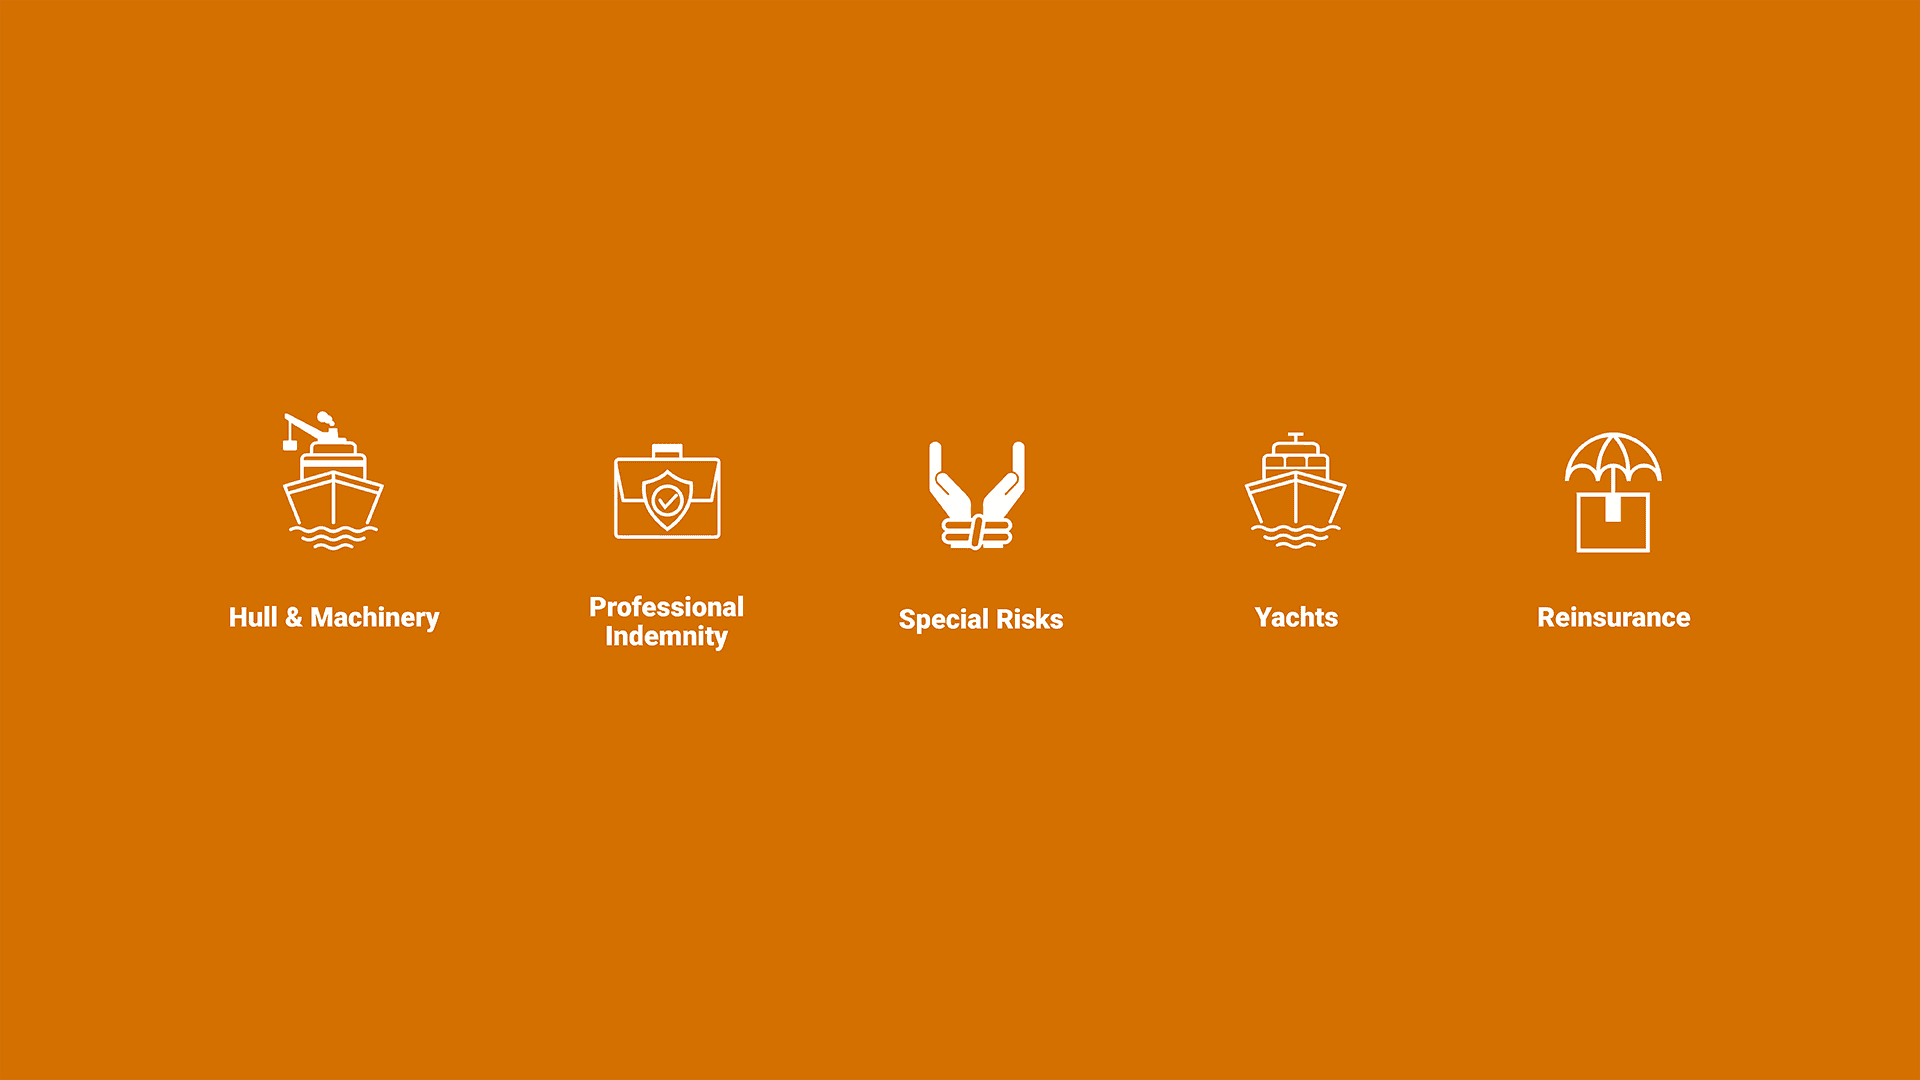 A graphic of the Seascope Maritime Insurance Services Icons on an orange background